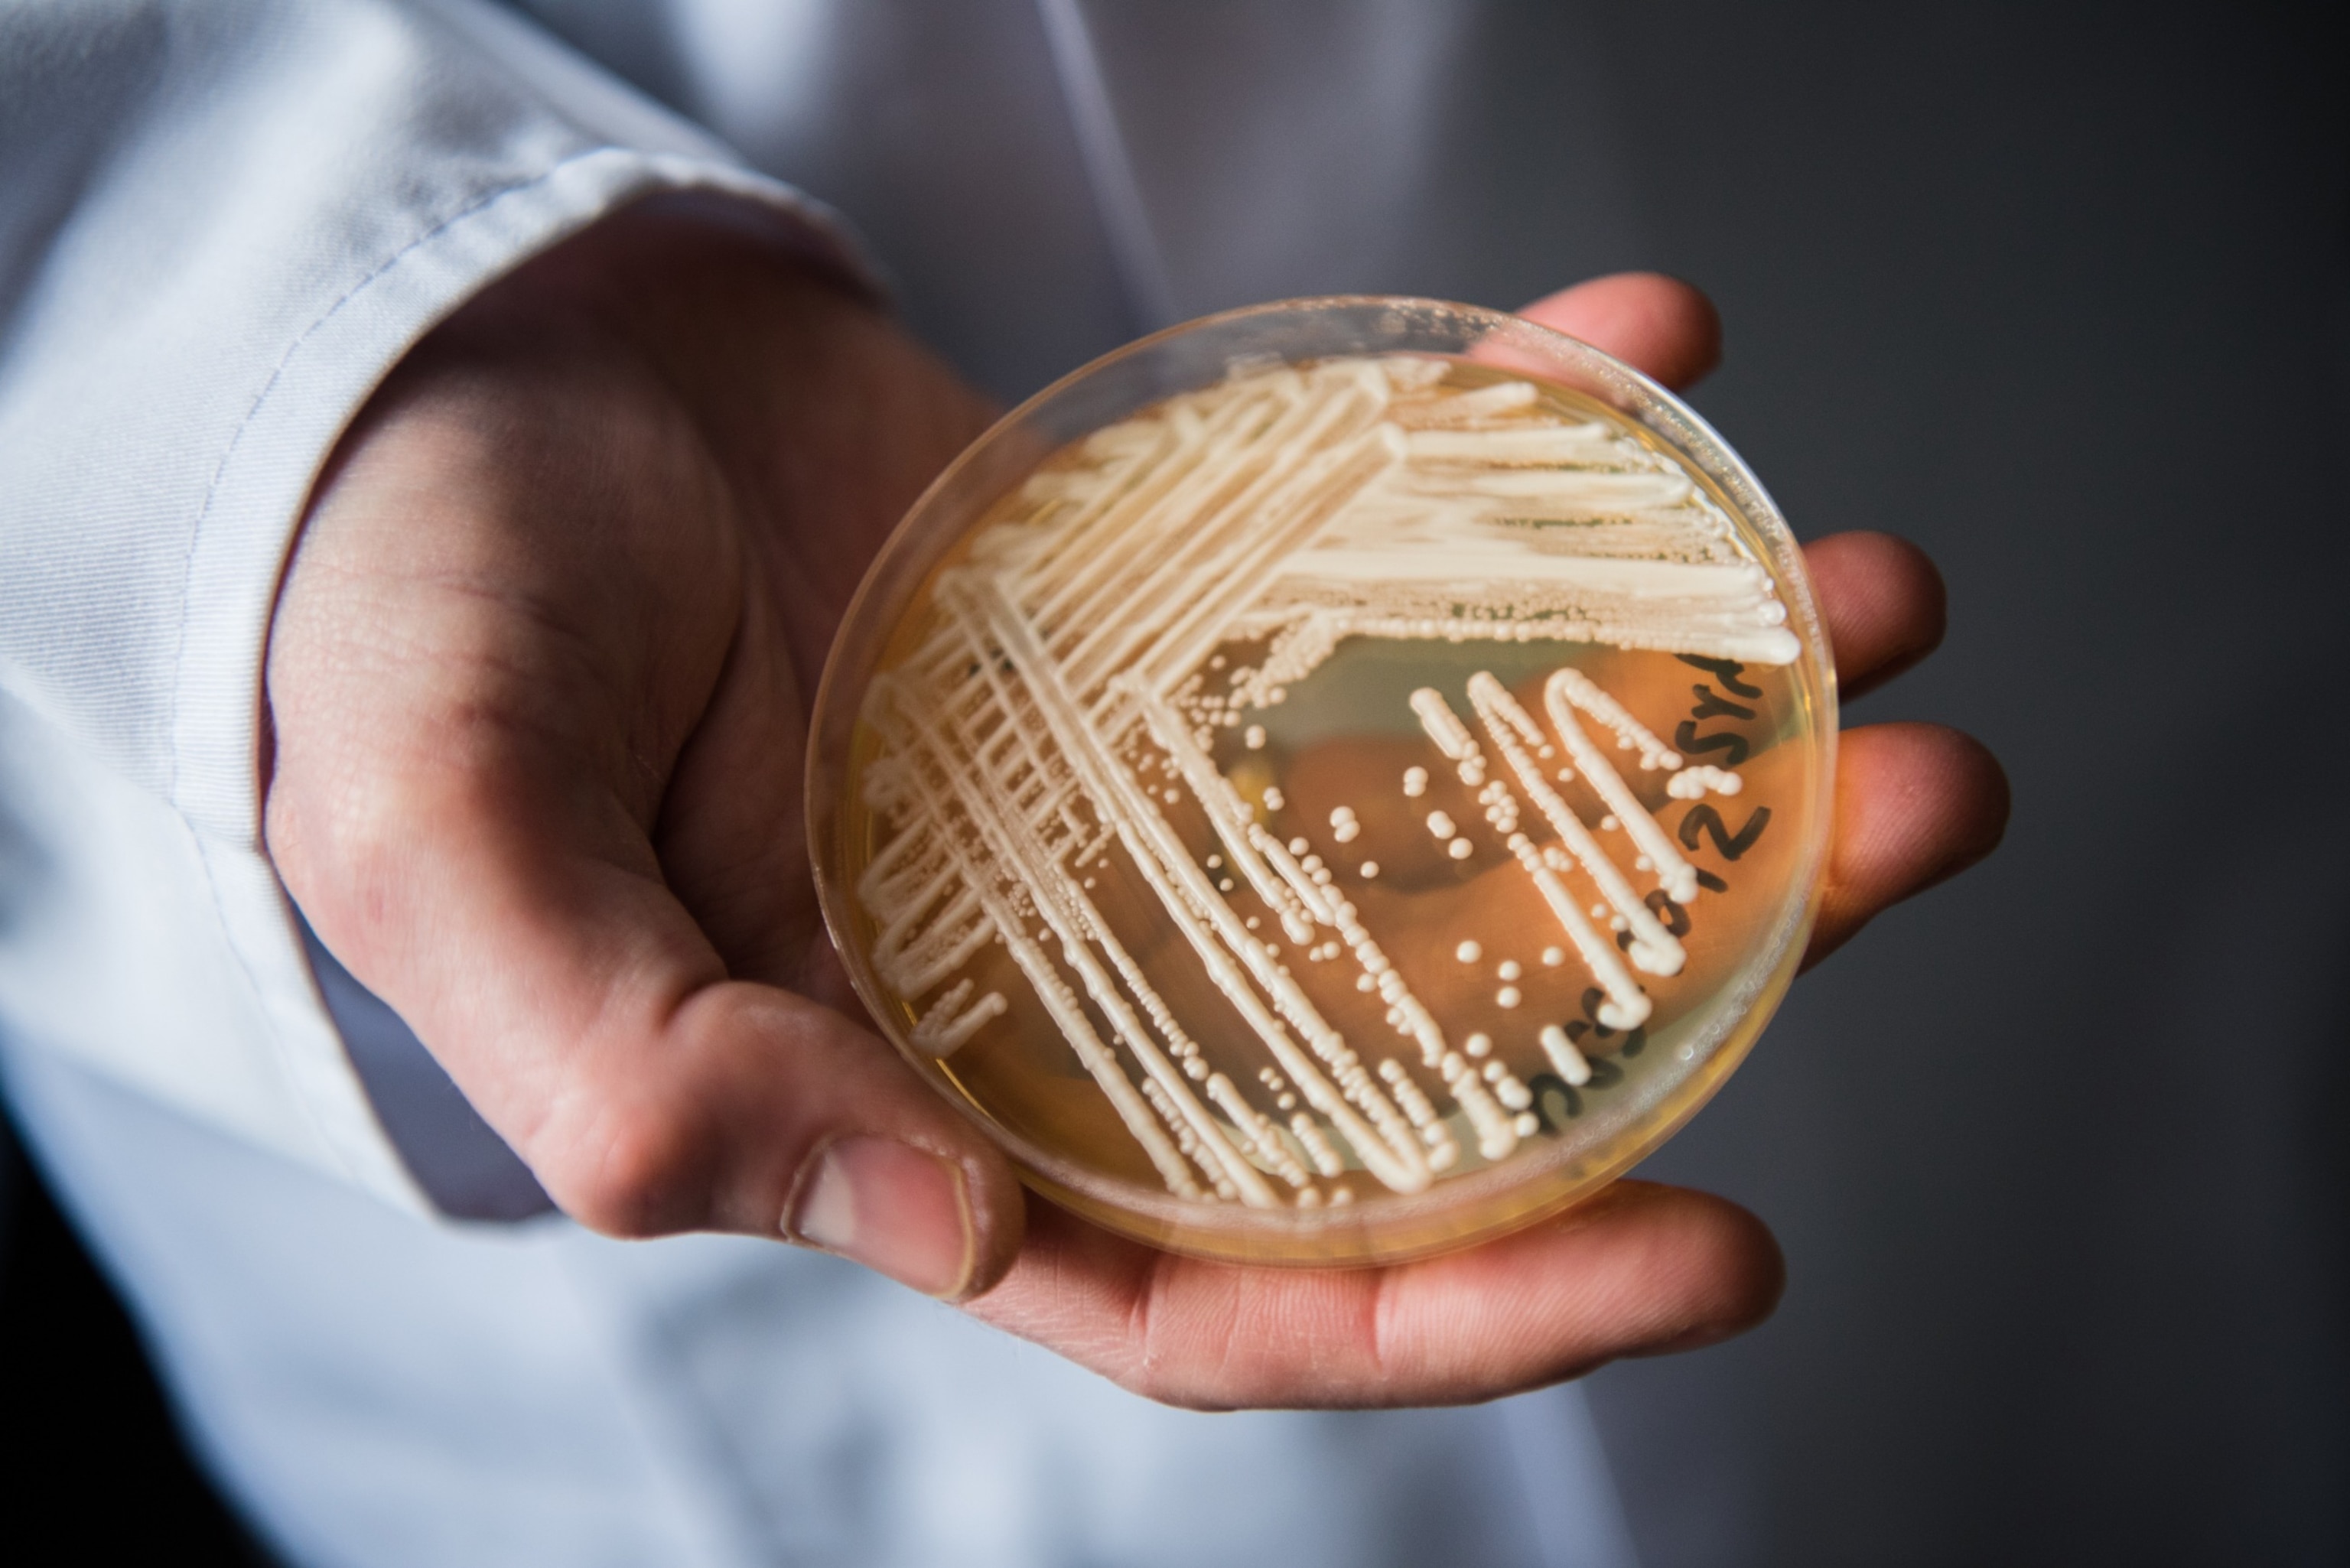 PHOTO: The director of the National Reference Centre for Invasive Fungus Infections, Oliver Kurzai, holding in his hands a petri dish holding the yeast candida auris in a laboratory of Wuerzburg University in Wuerzburg, Germany, January 23, 2018.